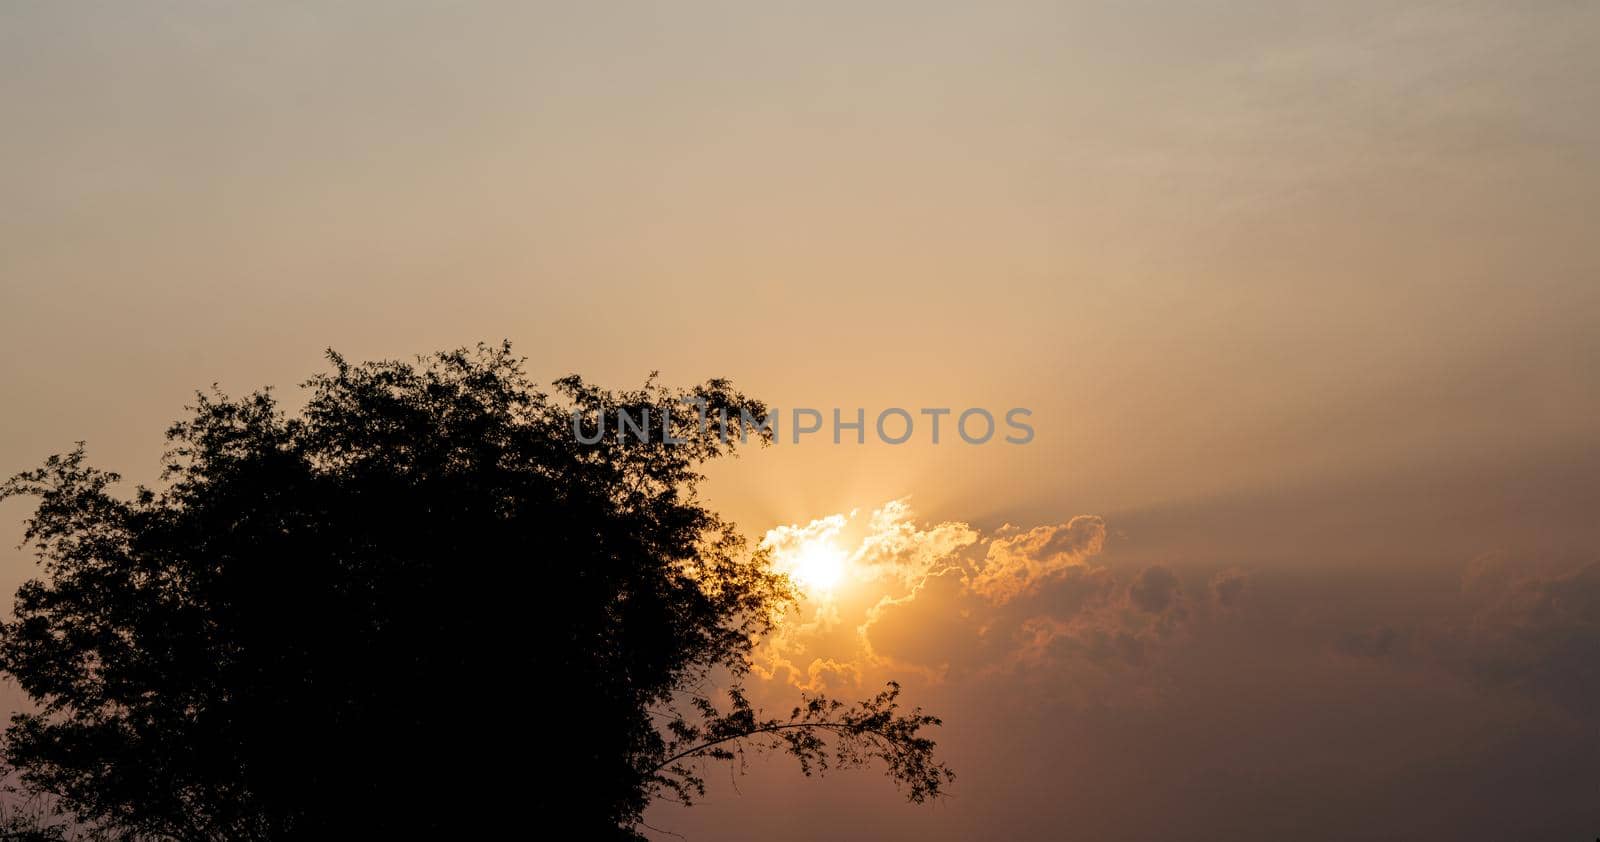 Abstract scenery sunset with silhouette of trees for nature background